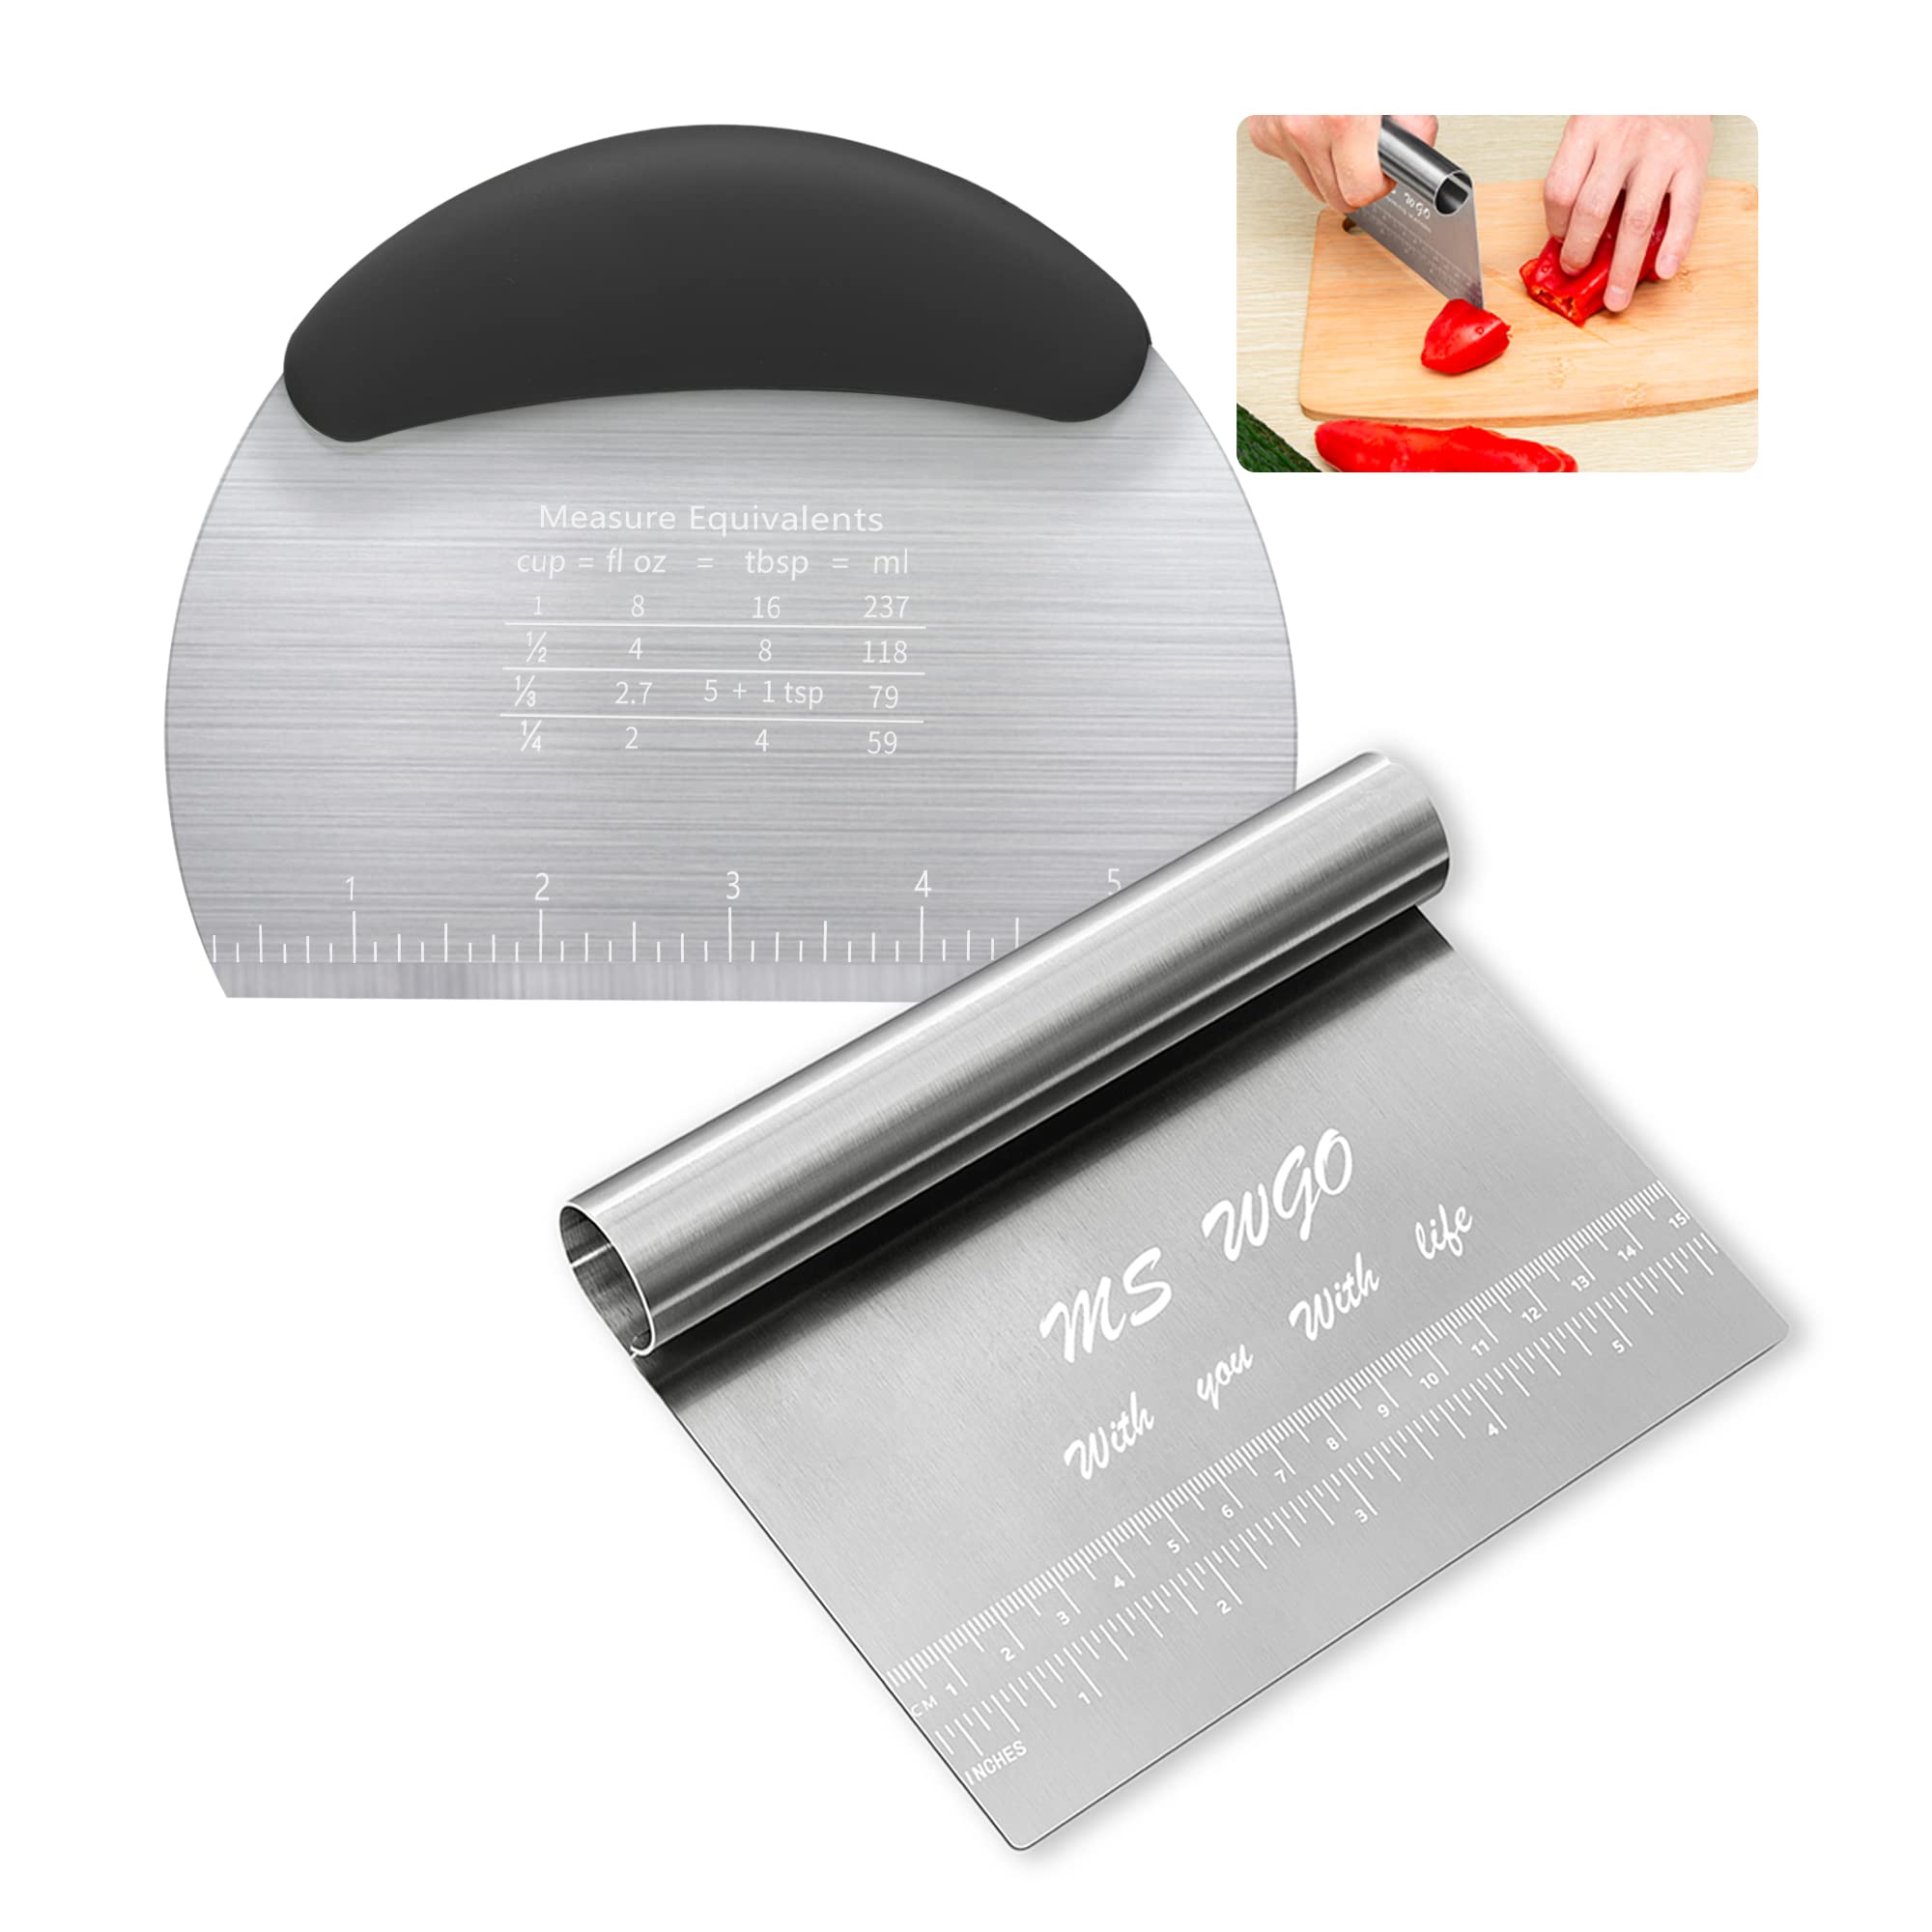 Dough Cutter and Scraper Tool stainless Steel Pizza Cutter Pastry Scraper  for Baking Cake Bench Scraper Cake Scraper with Measuring Scale for Pizza